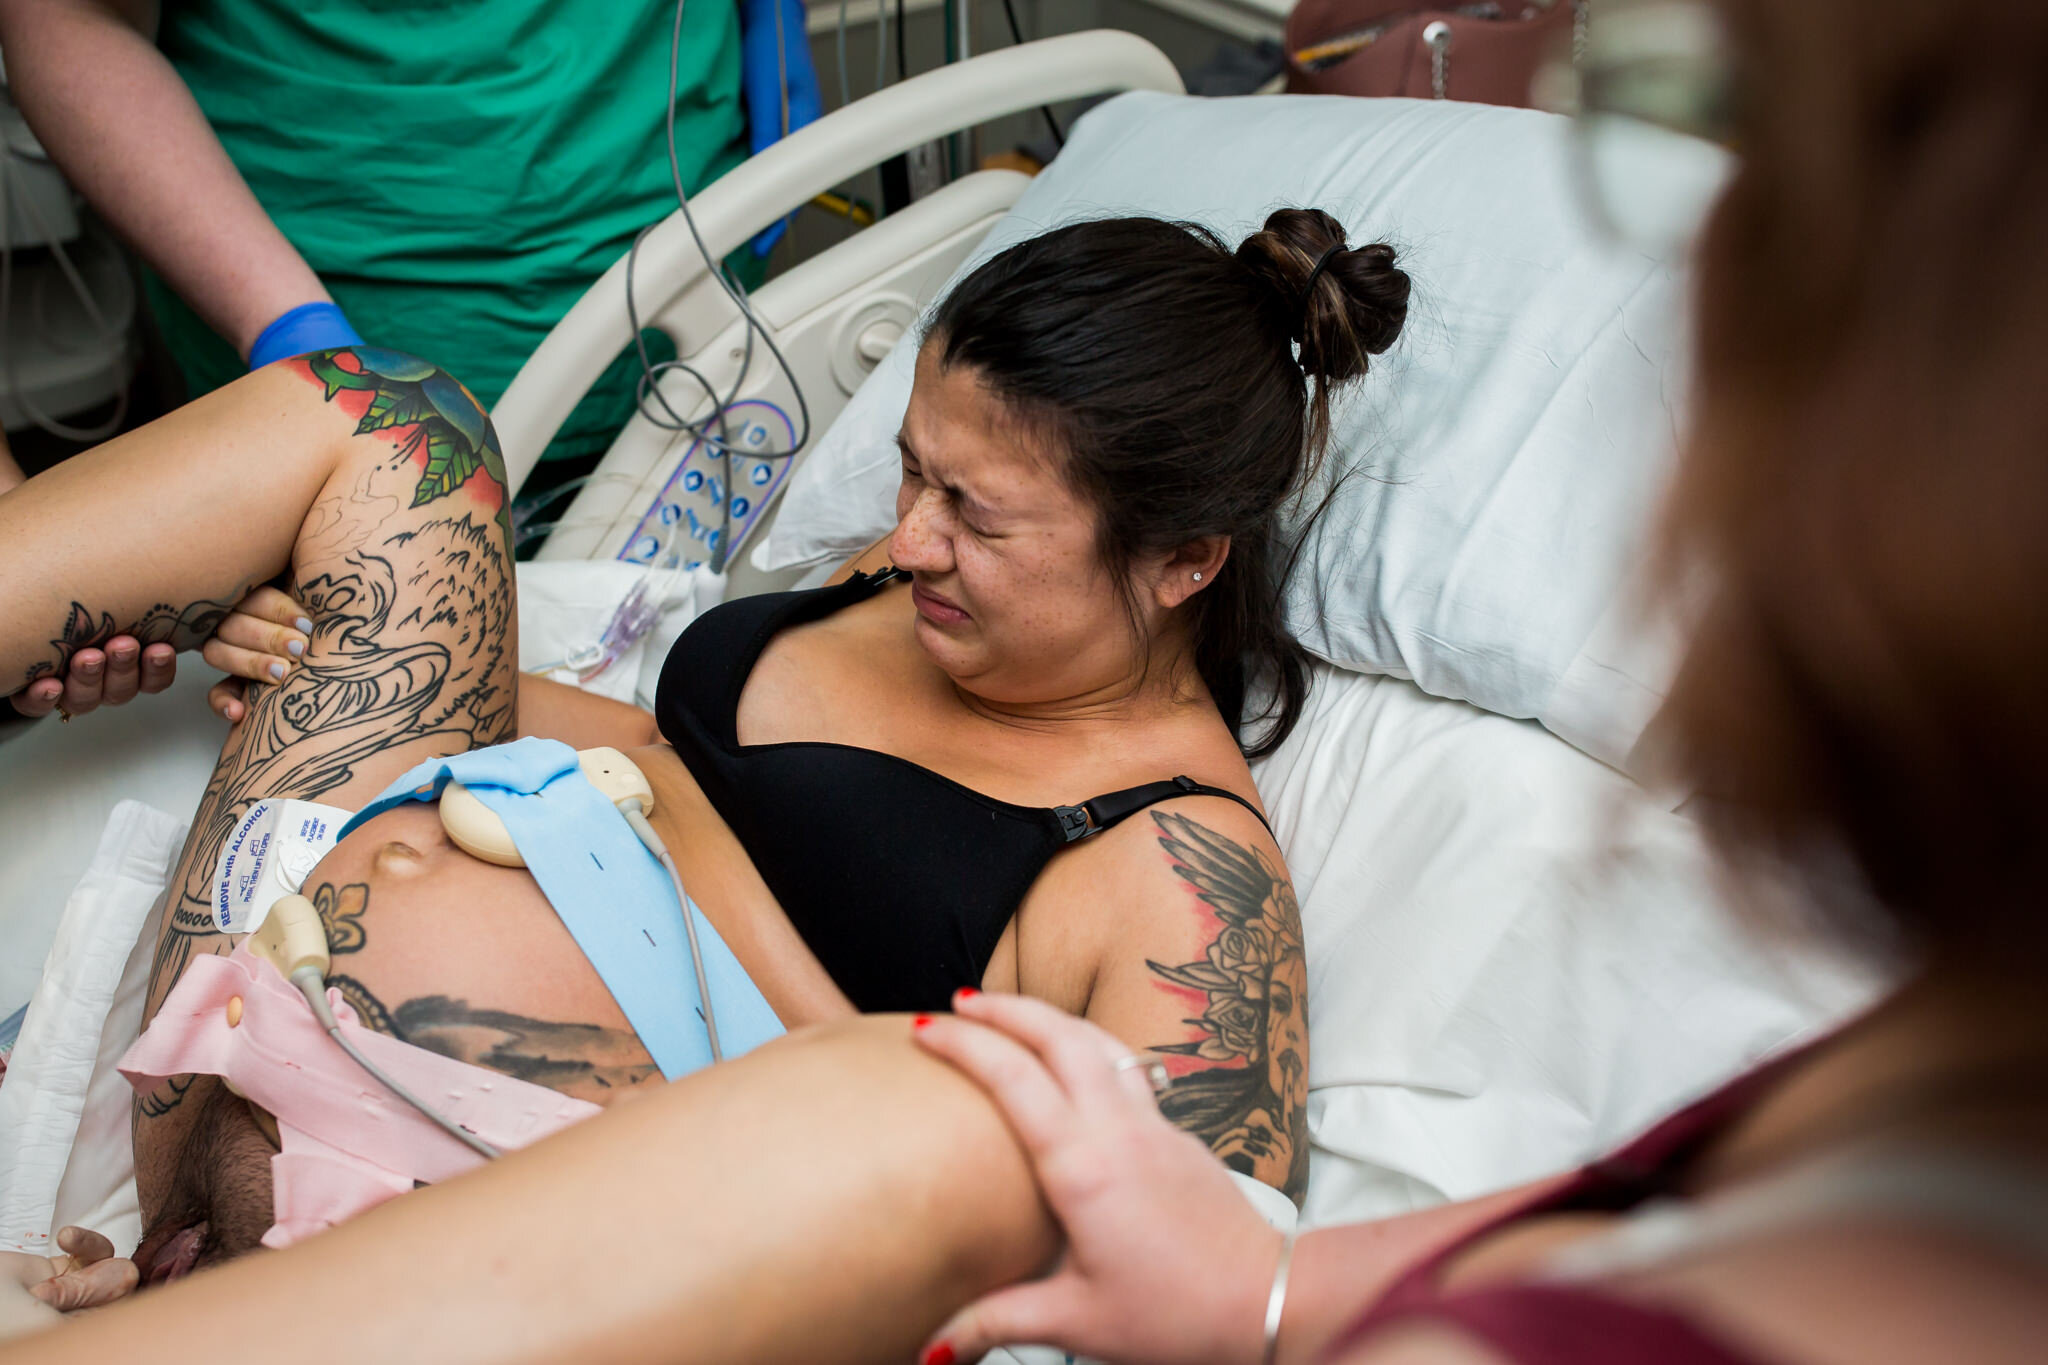 mom pushes through contraction during hospital birth